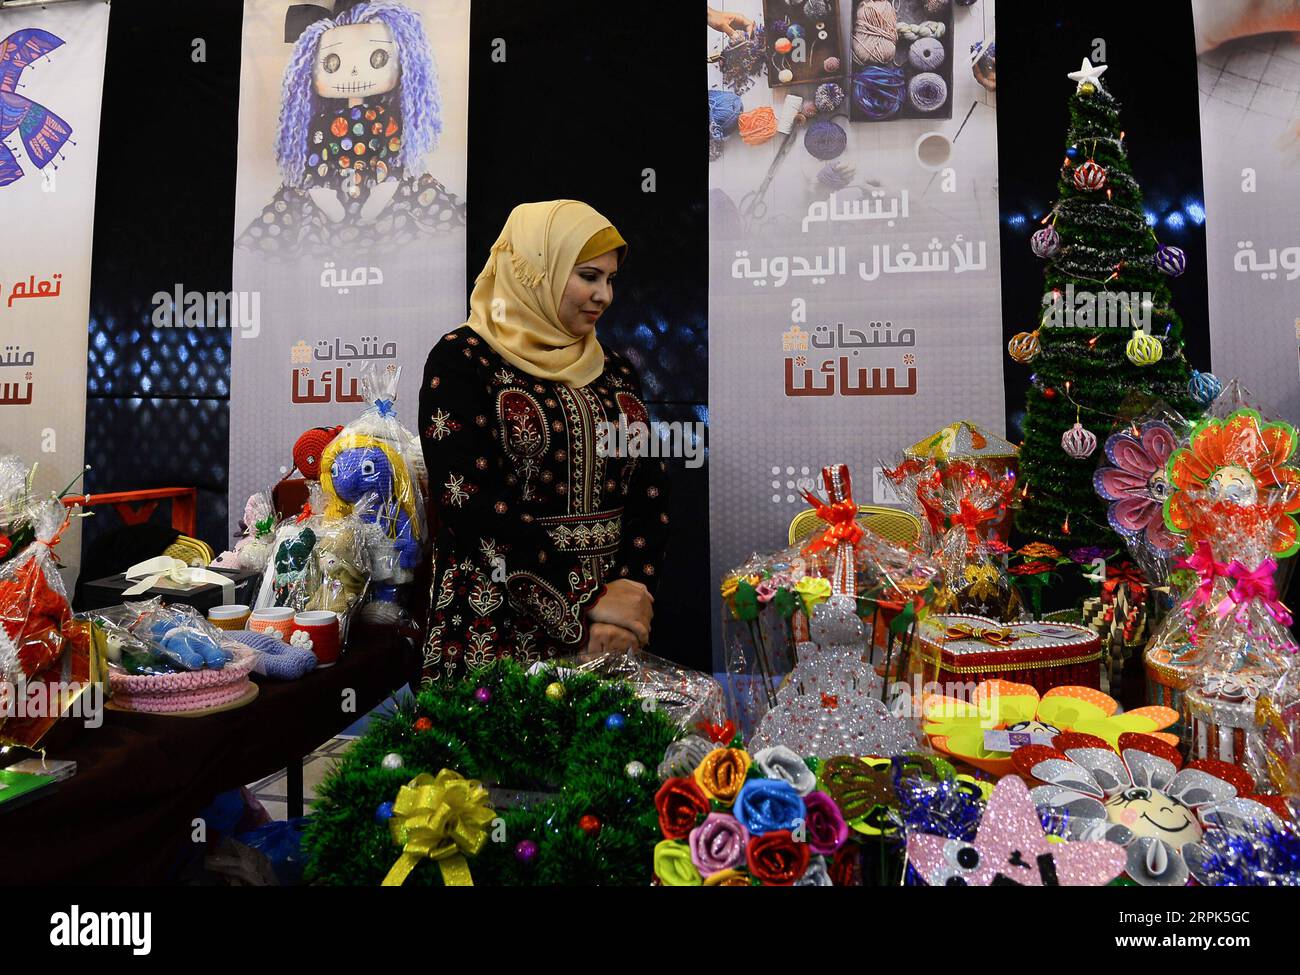 191230 -- GAZA, Dec. 30, 2019 Xinhua -- A Palestinian woman takes part in Our Women Product exhibition in Gaza City, Dec. 30, 2019. The exhibition displayed Palestinian fashion and other products for women. Photo by Rizek Abdeljawad/Xinhua MIDEAST-GAZA-EXHIBITION PUBLICATIONxNOTxINxCHN Stock Photo